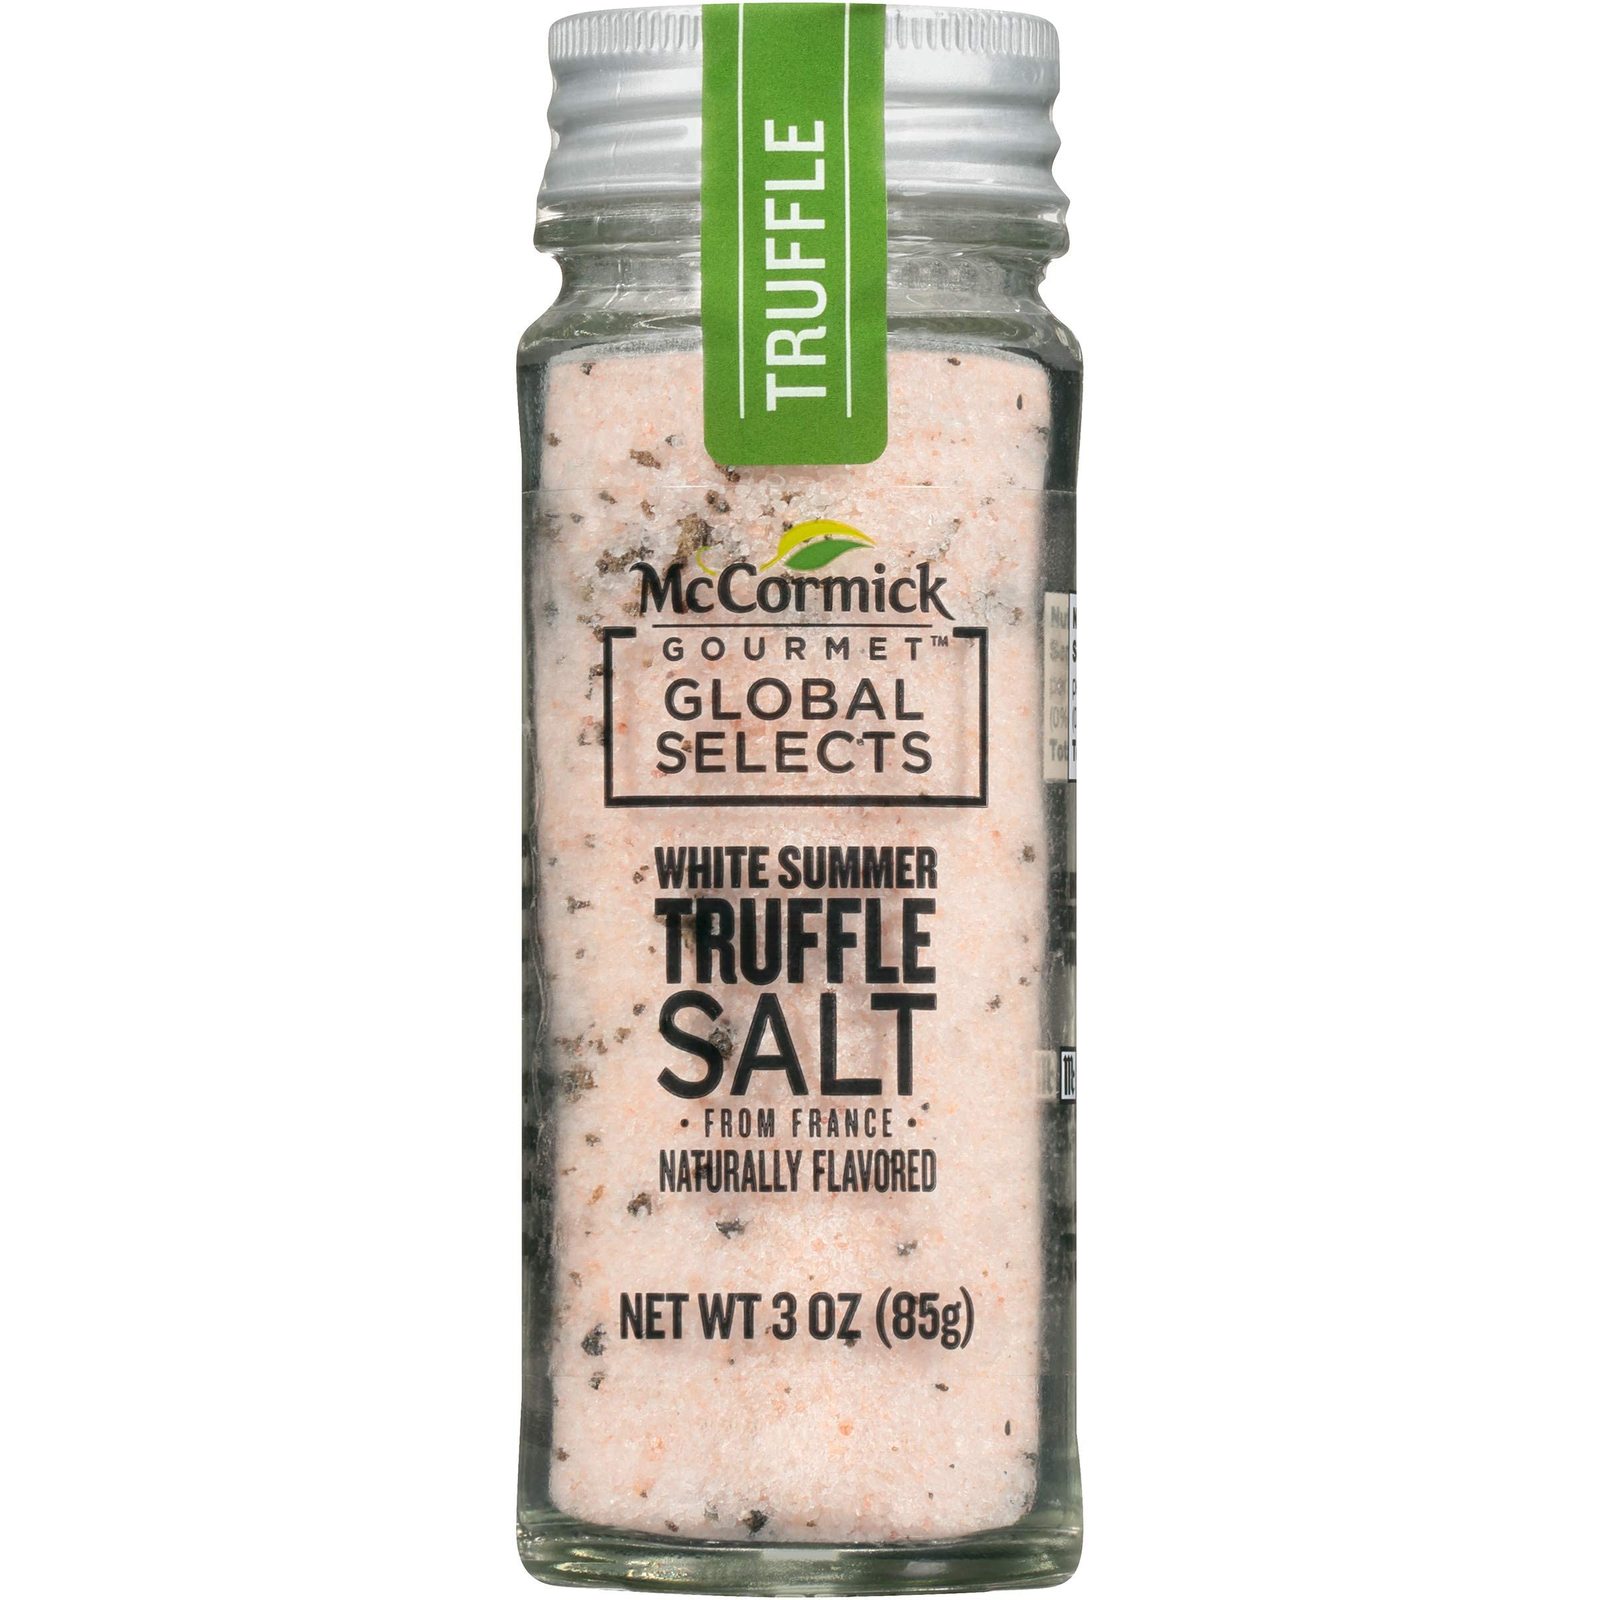 McCormick Gourmet Global Selects White Summer Truffle Salt from France, 3 oz - $7.87